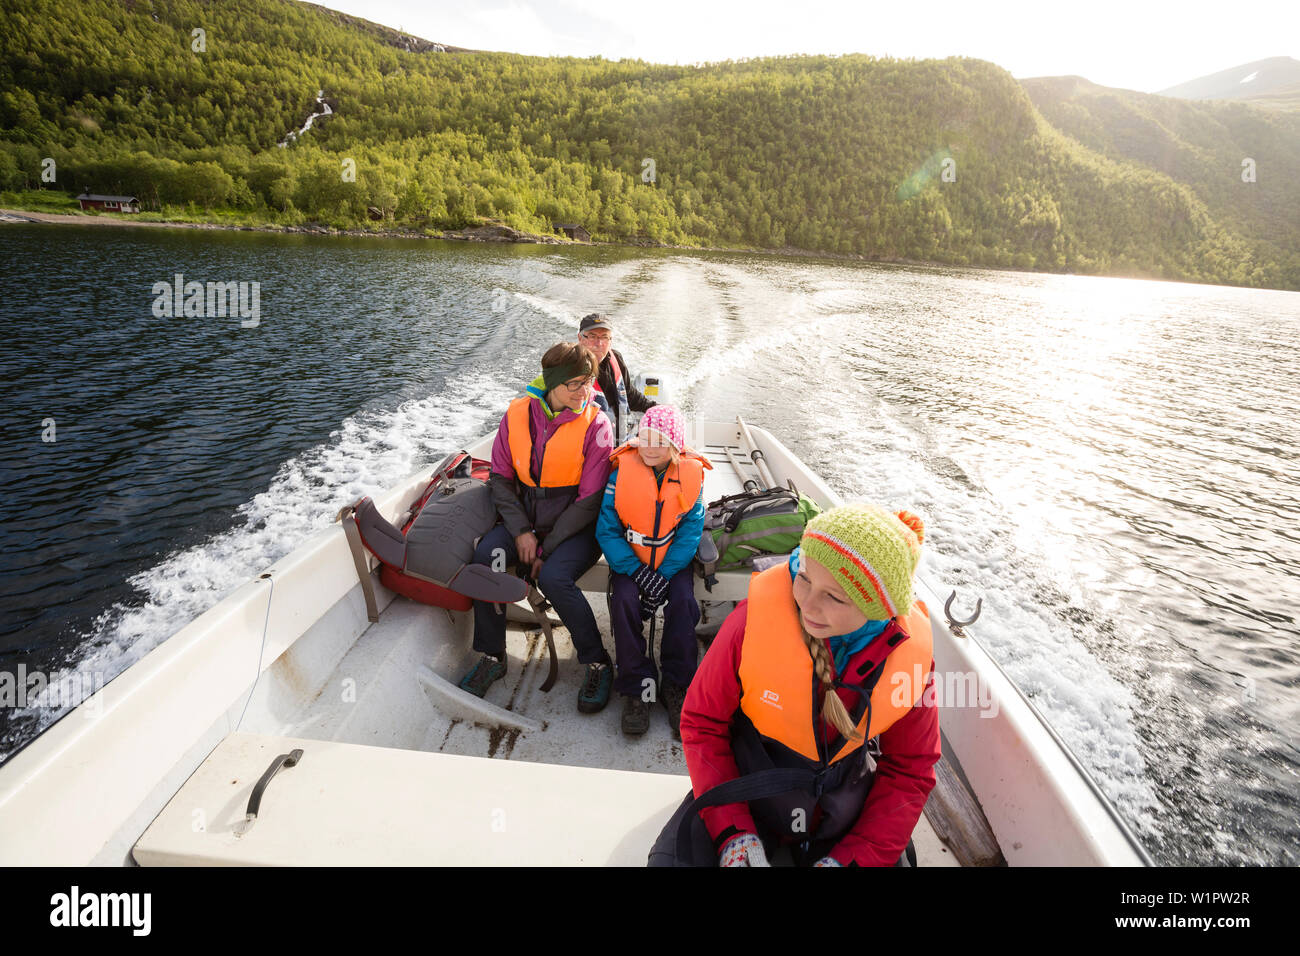 Two girls, a woman and a man in a boat. Boat taxi on lake Teusajaure provided by hut ward Loland Lindholm. Trekking on Kungsleden, Laponia, Lappland, Stock Photo